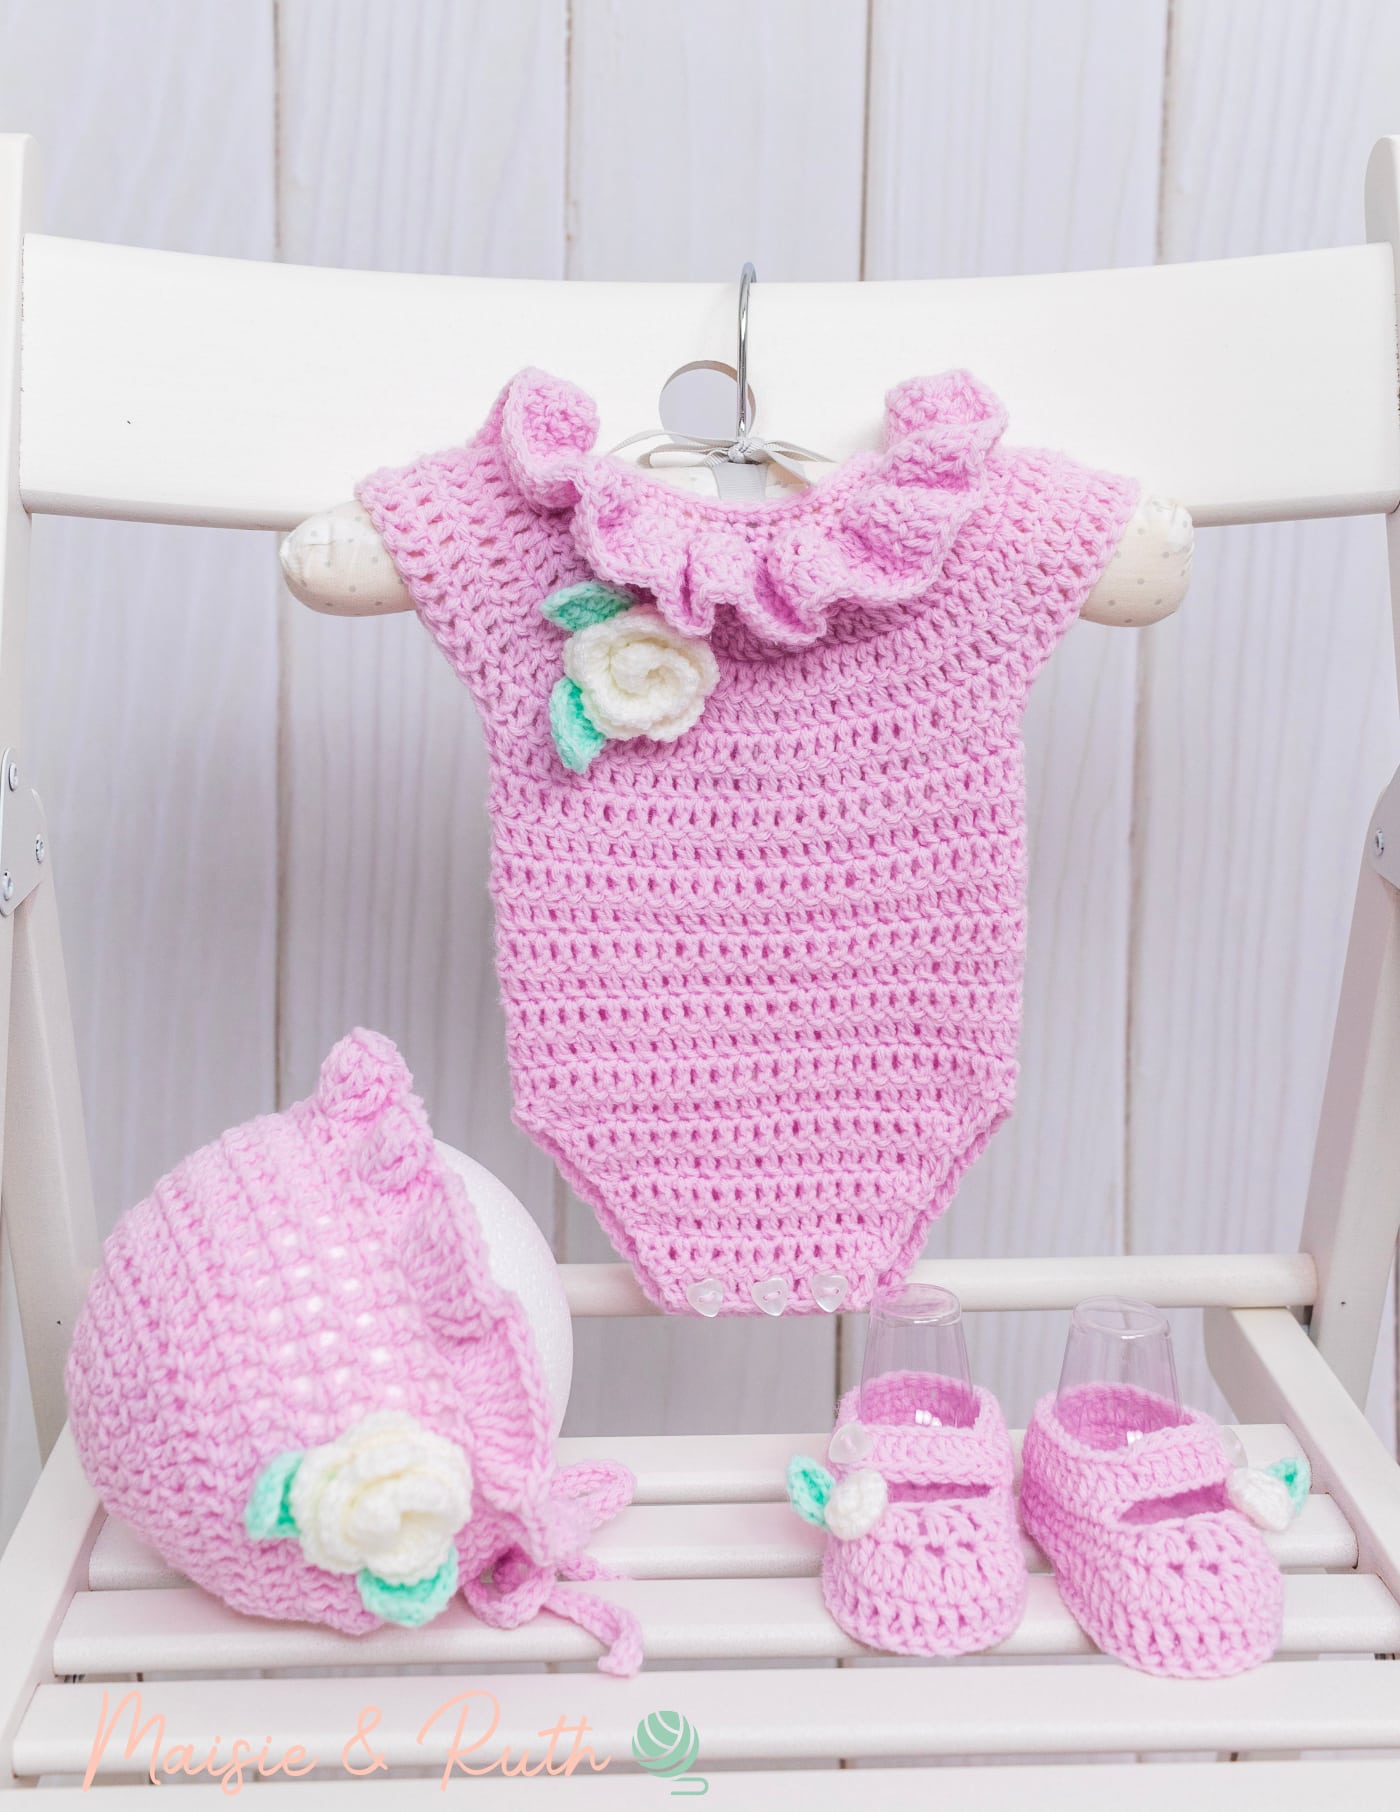 Crochet Flower with Romper Bonnet and Booties